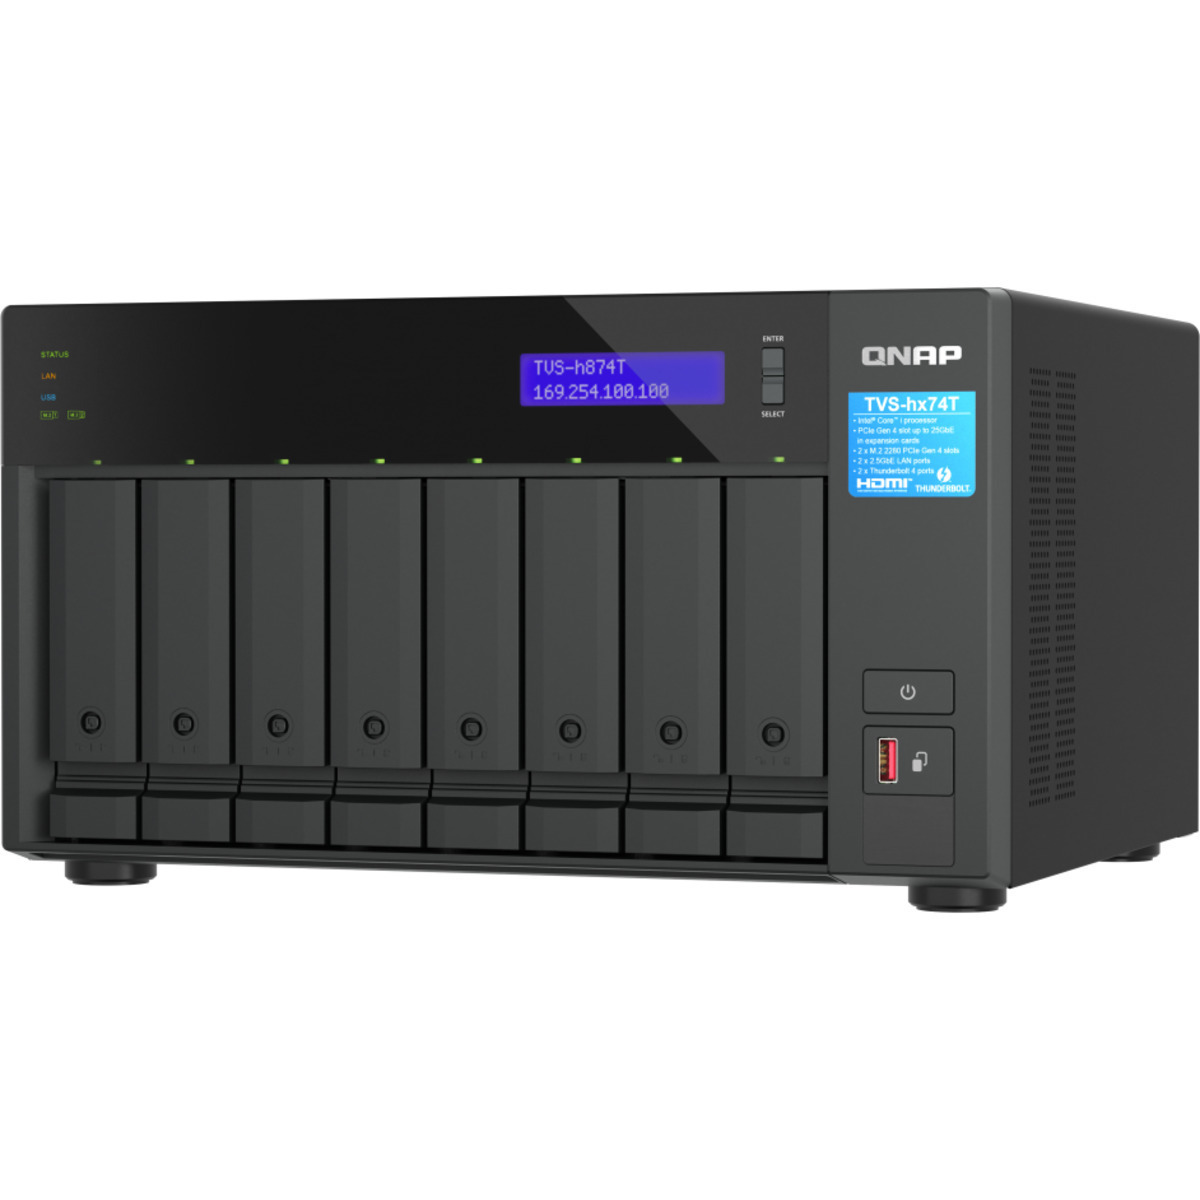 buy QNAP TVS-h874T Core i7 Thunderbolt 4 80tb Desktop DAS-NAS - Combo Direct + Network Storage Device 8x10000gb Seagate IronWolf Pro ST10000NT001 3.5 7200rpm SATA 6Gb/s HDD NAS Class Drives Installed - Burn-In Tested - ON SALE - nas headquarters buy network attached storage server device das new raid-5 free shipping usa spring sale TVS-h874T Core i7 Thunderbolt 4